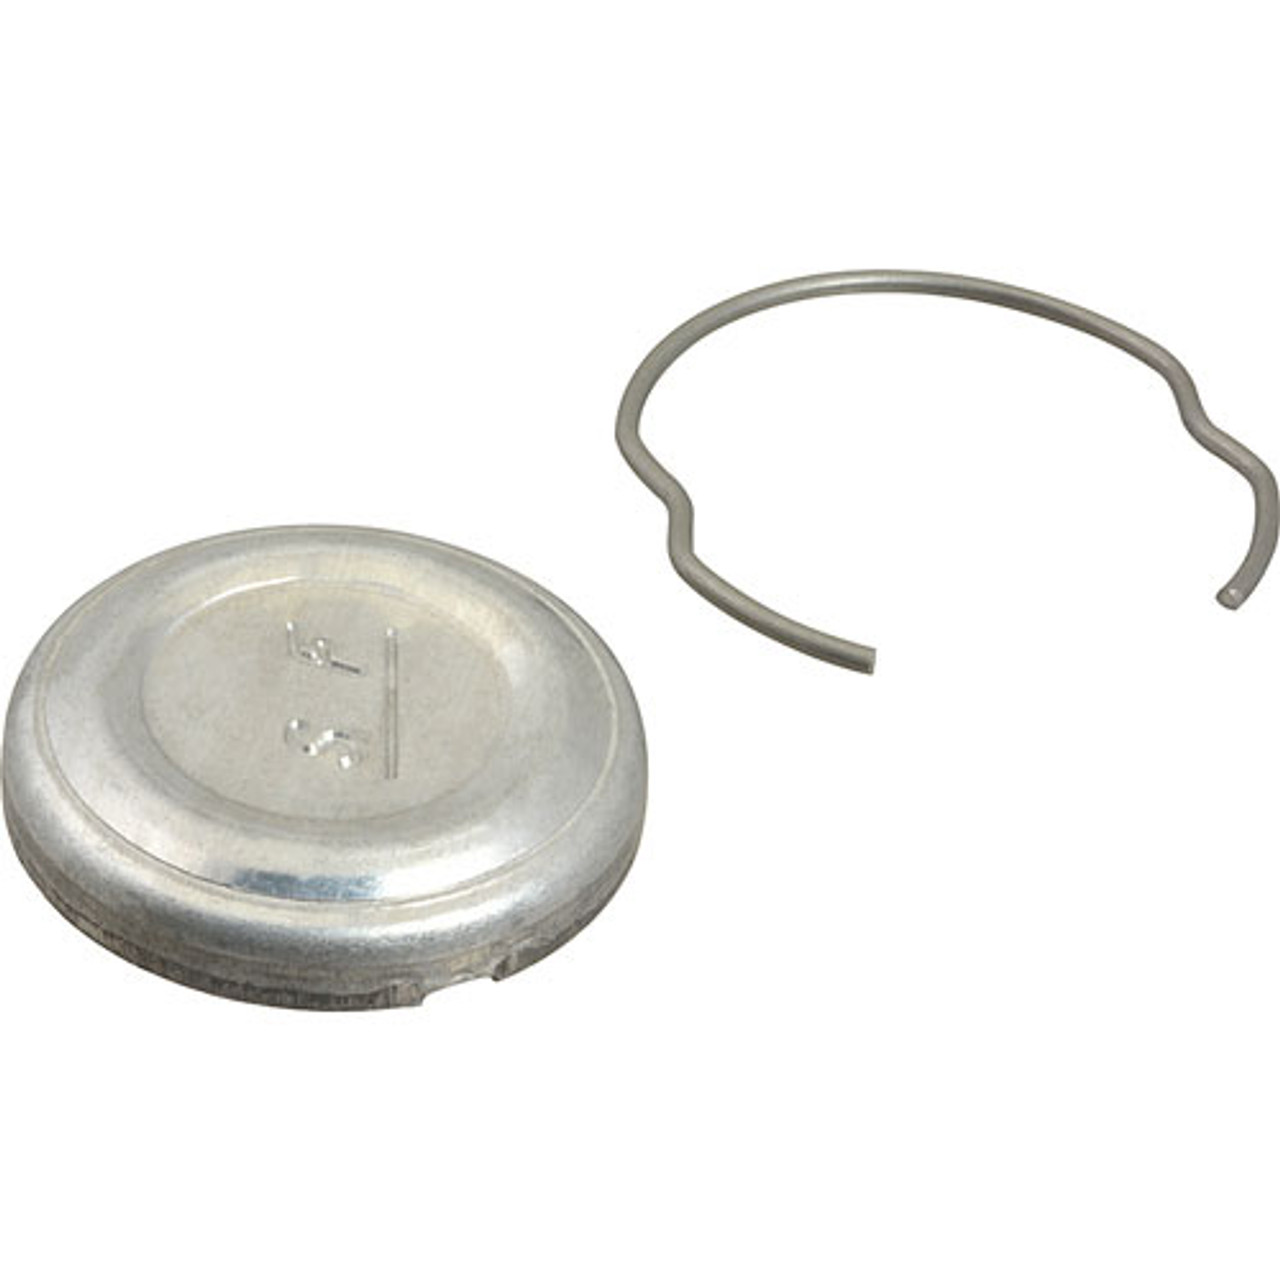 Town Foodservice Equipment 56854 - Sensor W/Ring-Tow